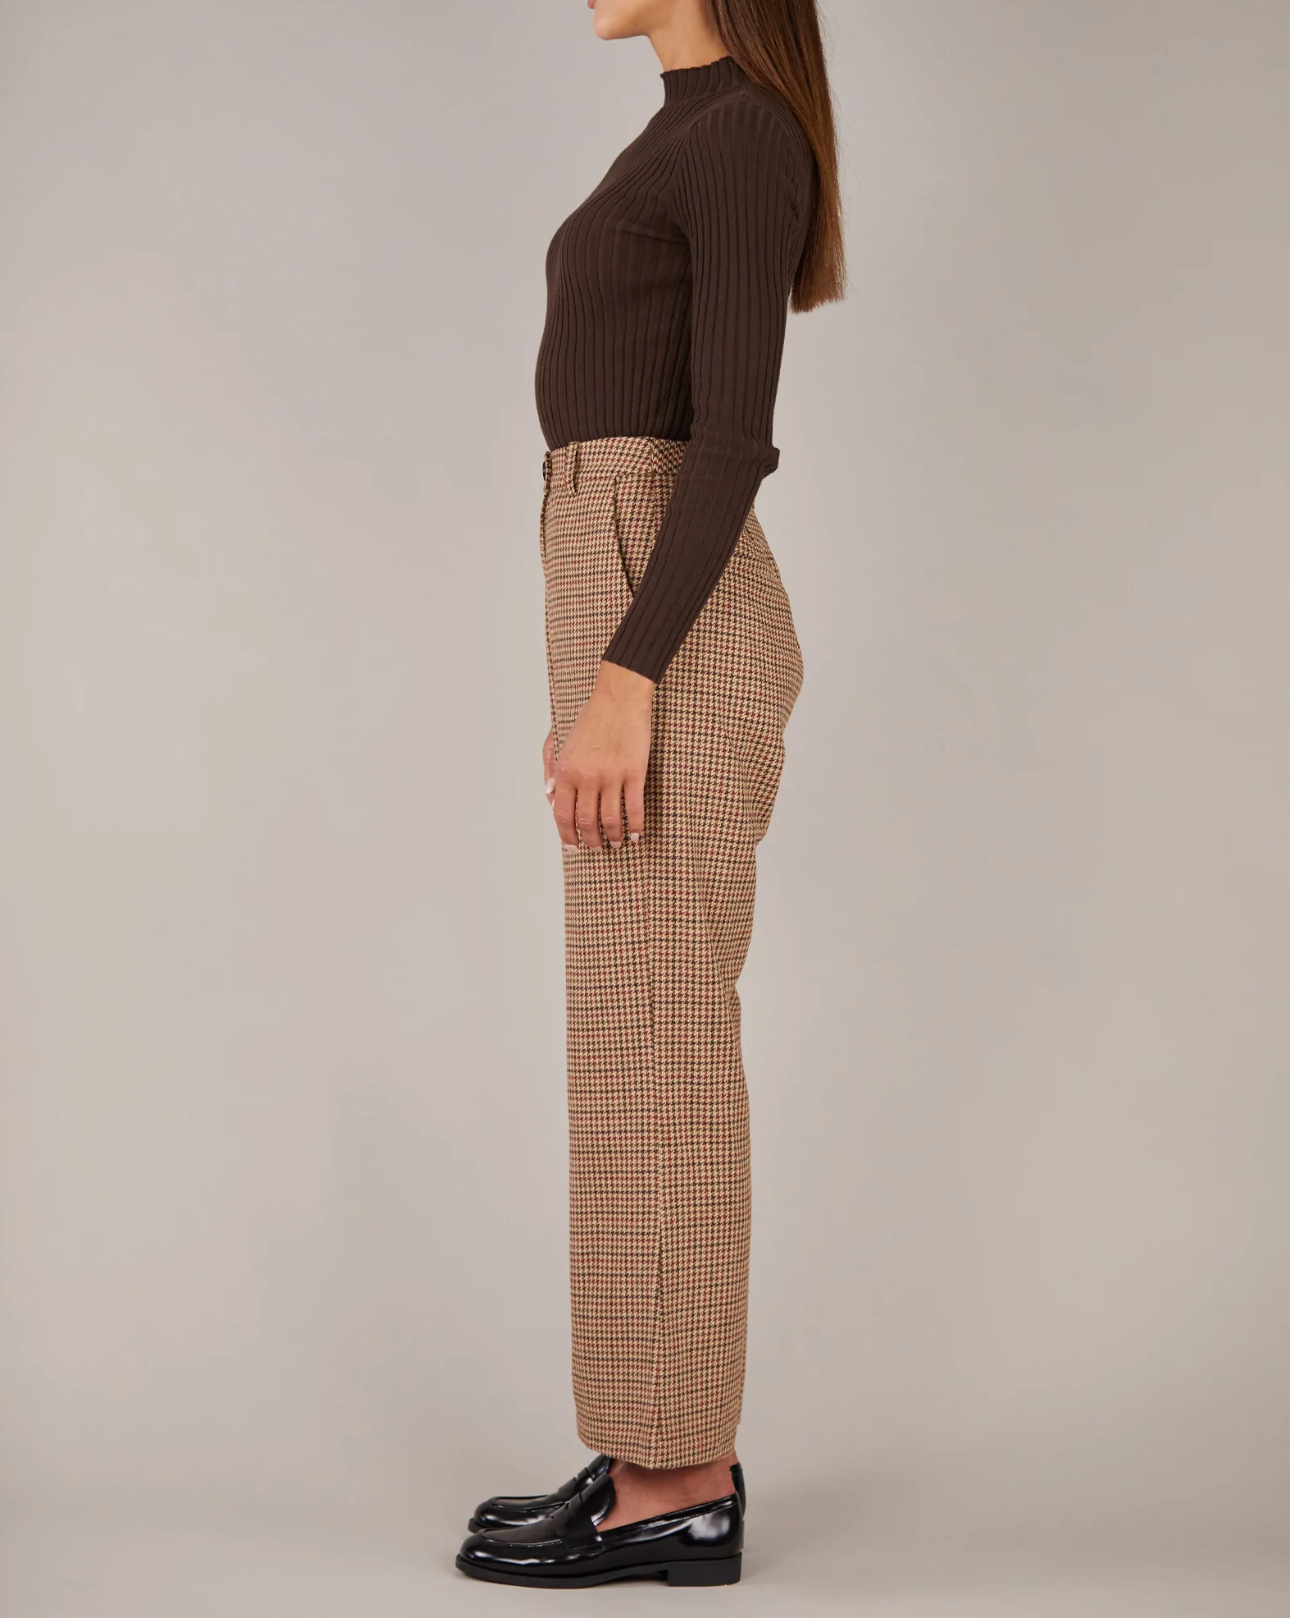 Amelius - Equinox Wool Check Pant Houndstooth